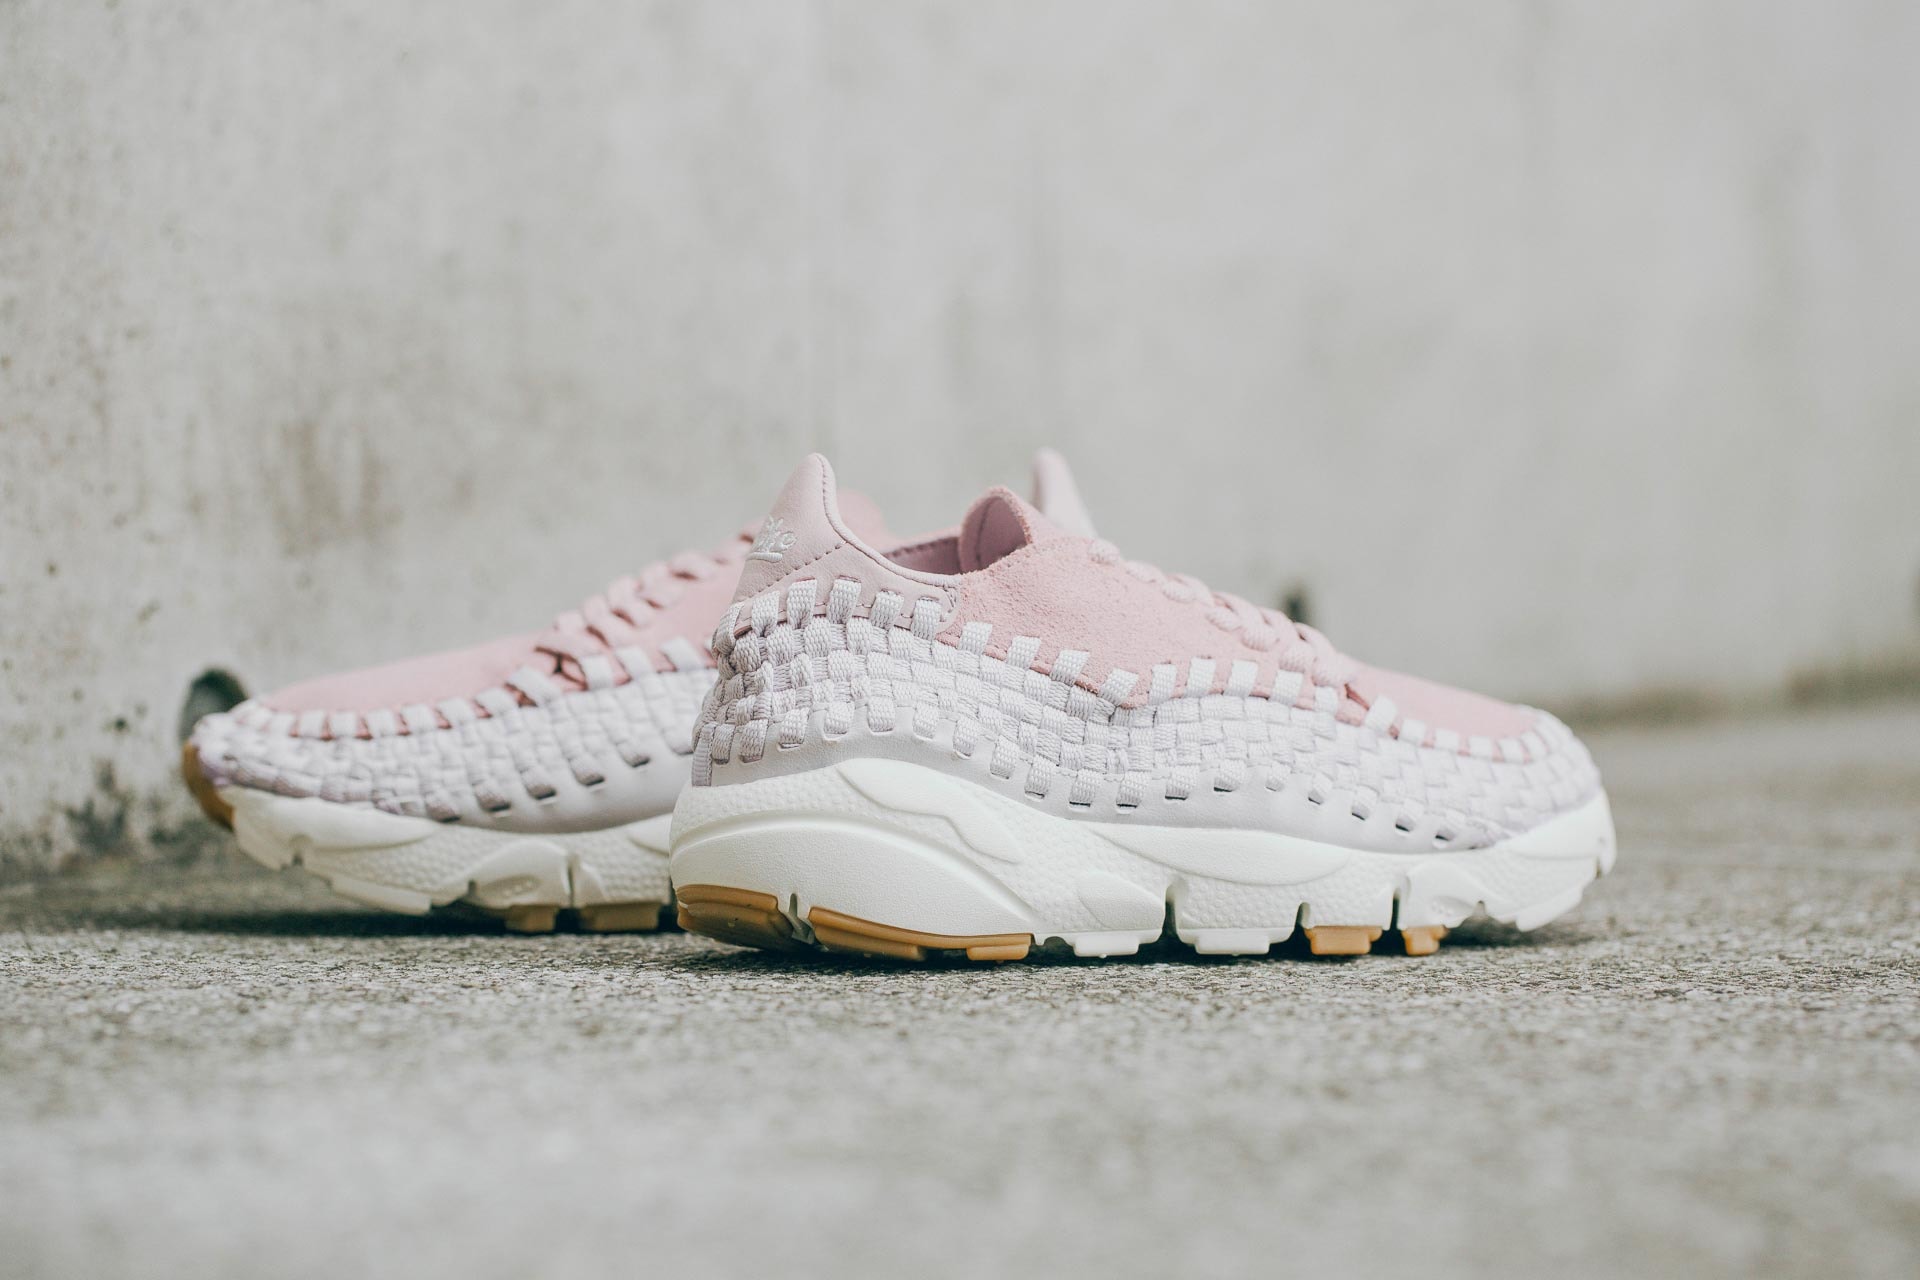 Nike Air Footscape Woven 全新女生專屬配色